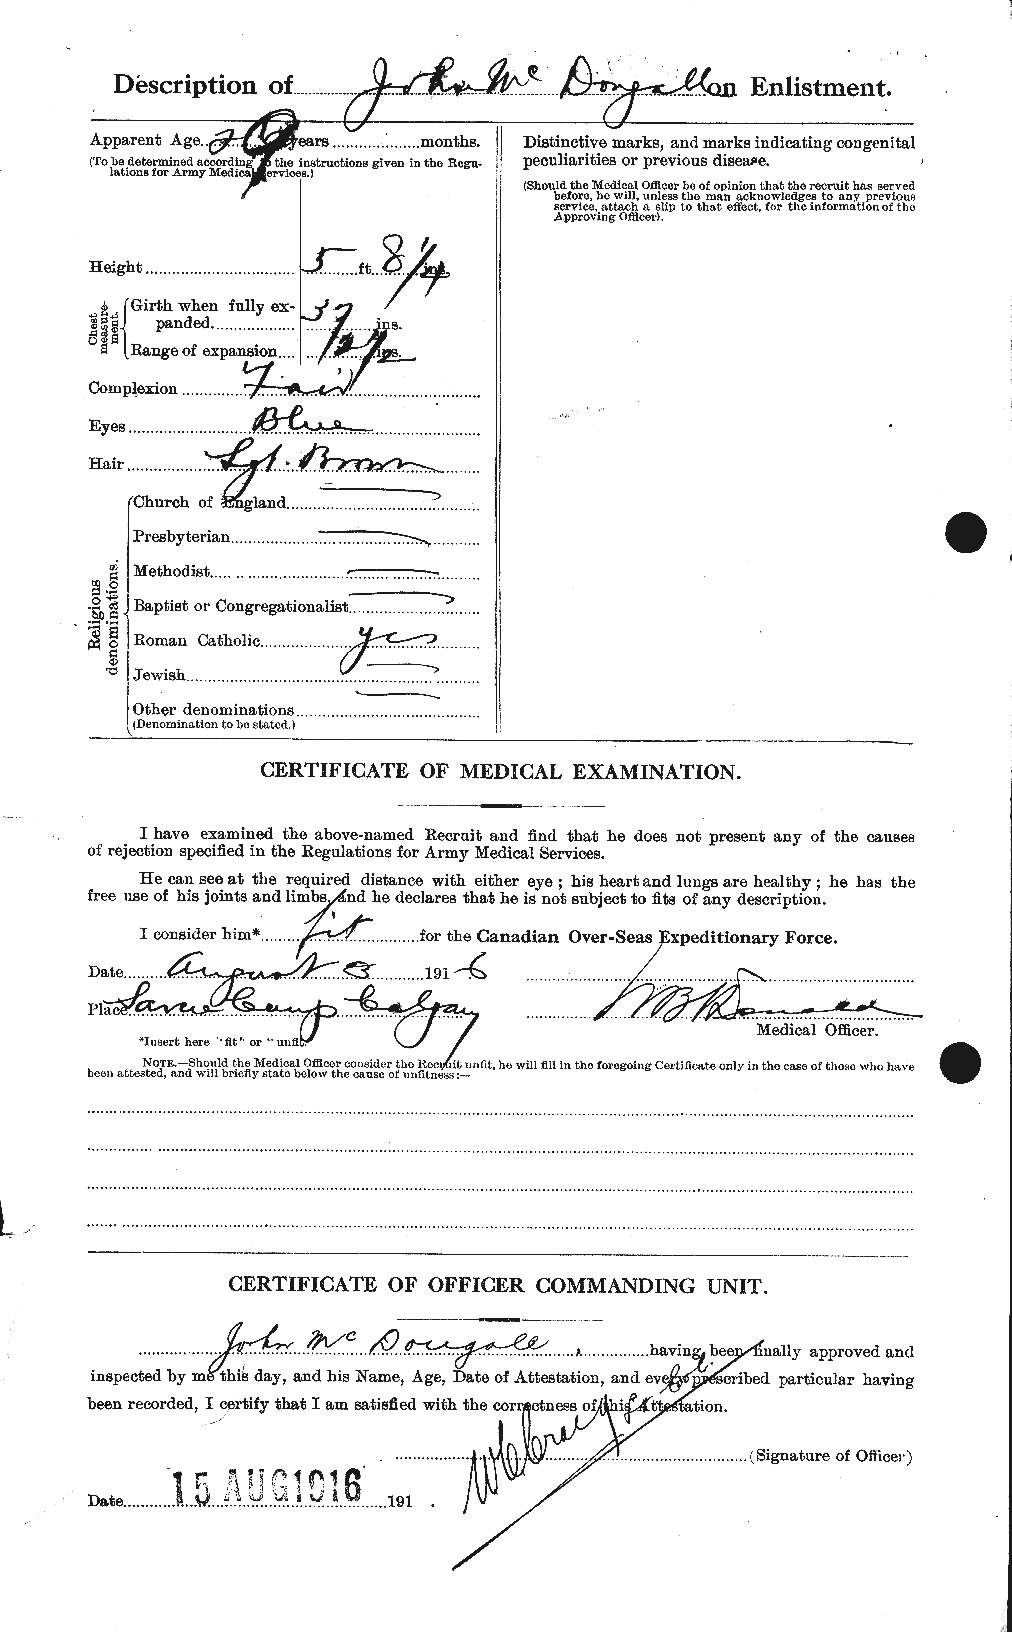 Personnel Records of the First World War - CEF 518272b